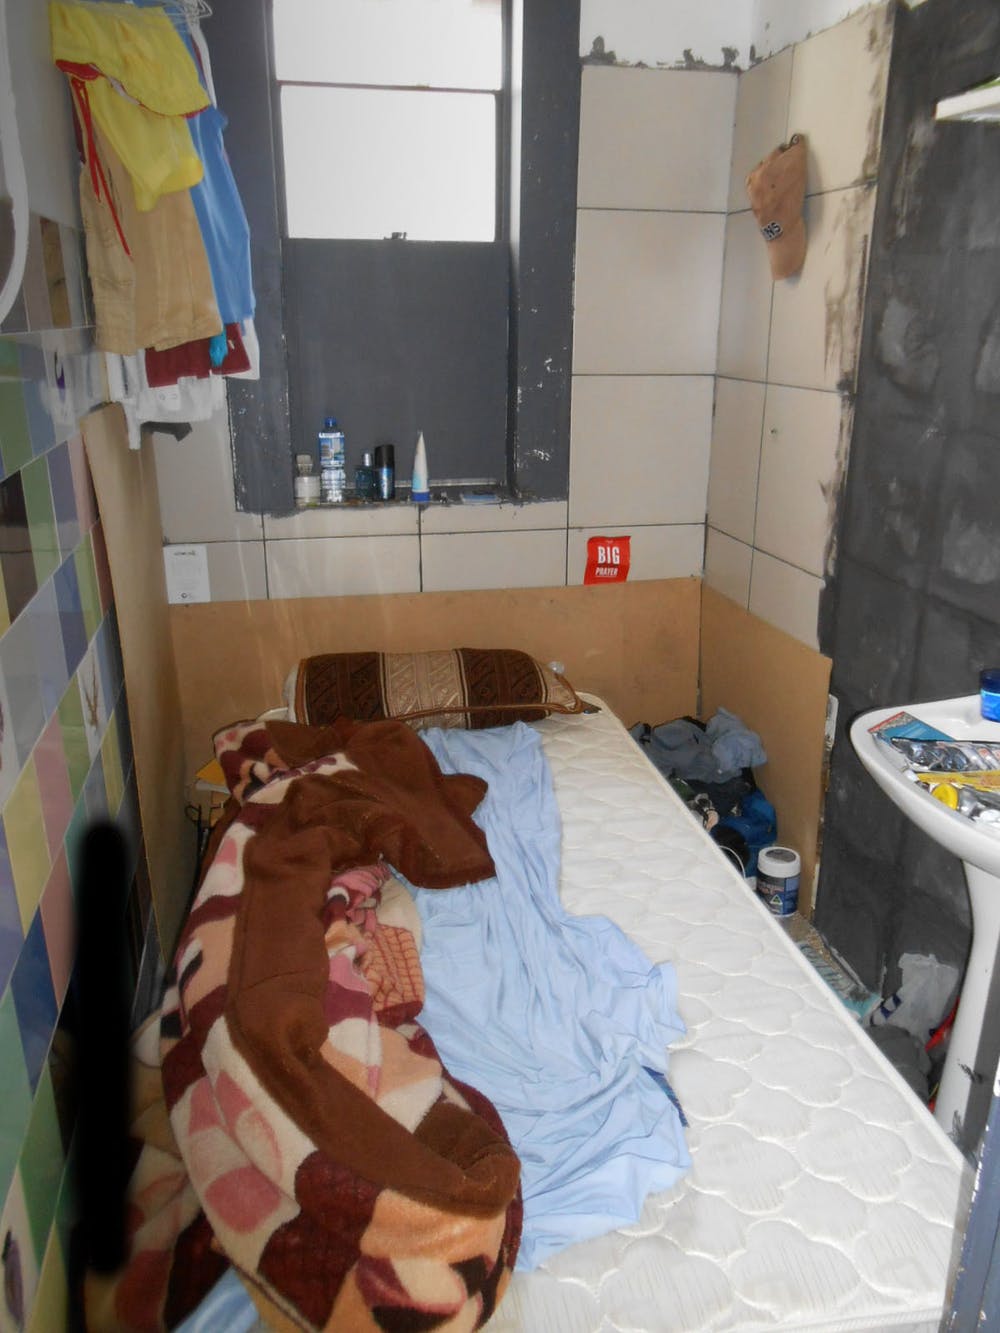 City of Sydney investigations of overcrowded dwellings have found people sleeping in bathrooms and even a pantry